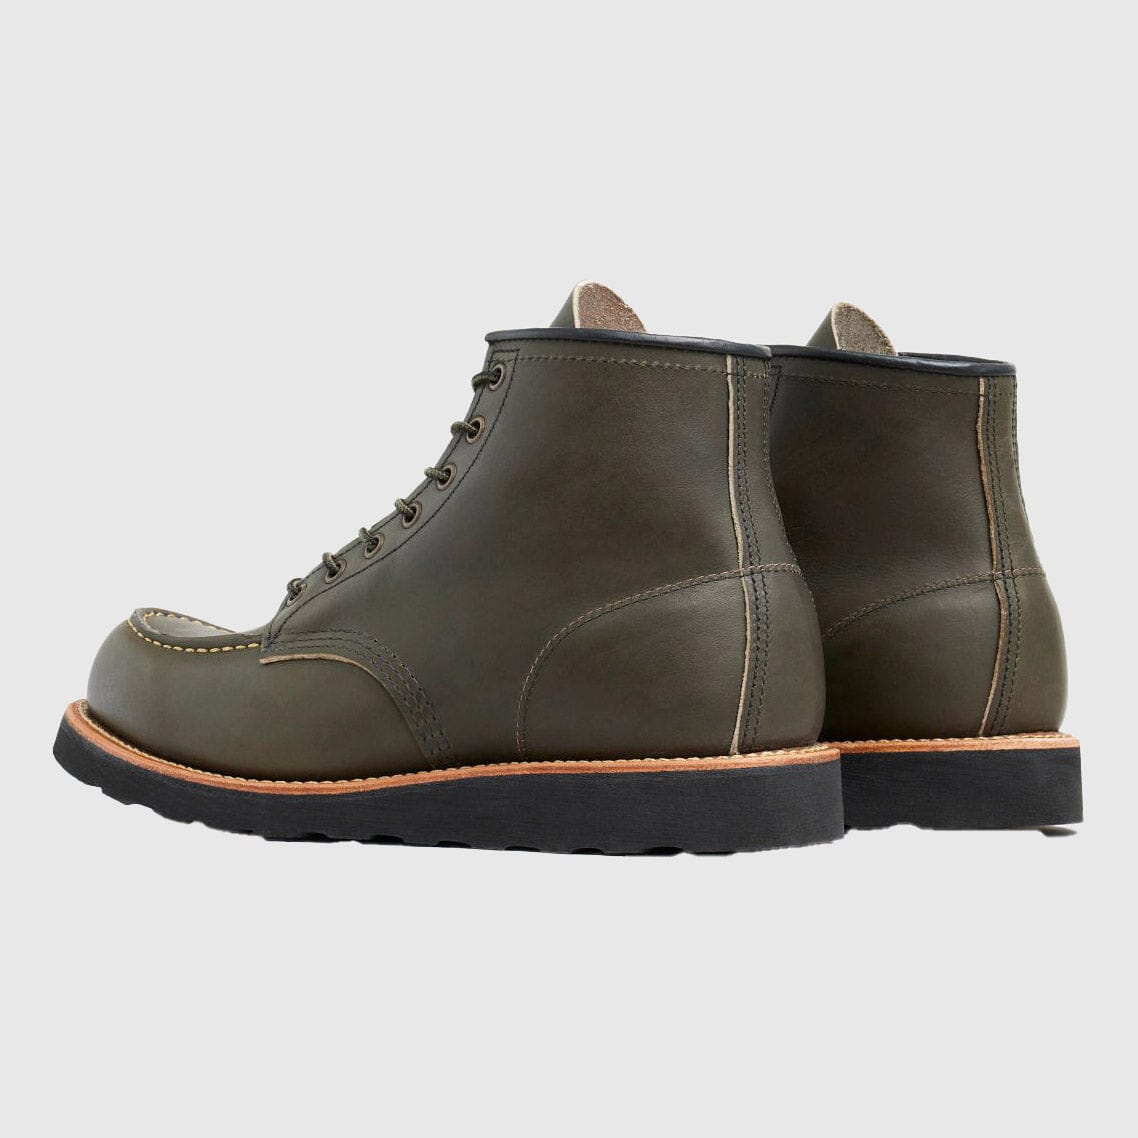 Red Wing Moc Toe Boots - Alpine Portage Boots Red Wing 